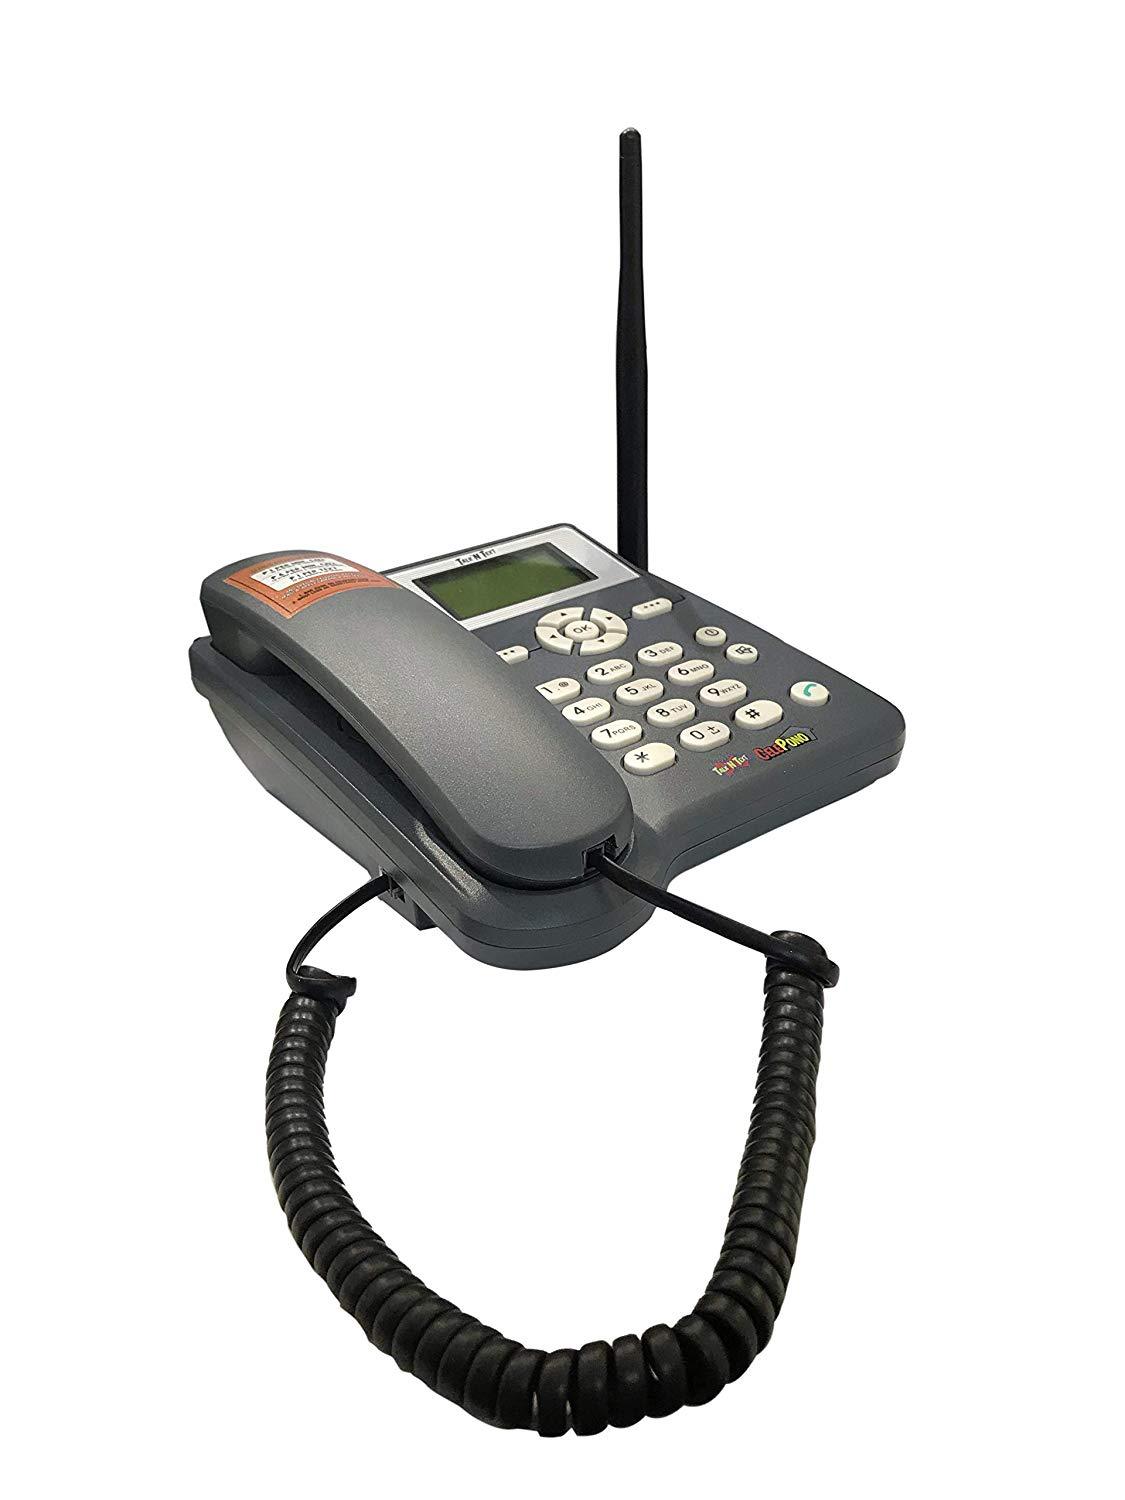 Crony cellphone GSM Wireless Land office Phone ETS3023- Sim Card Support, Grey - Edragonmall.com